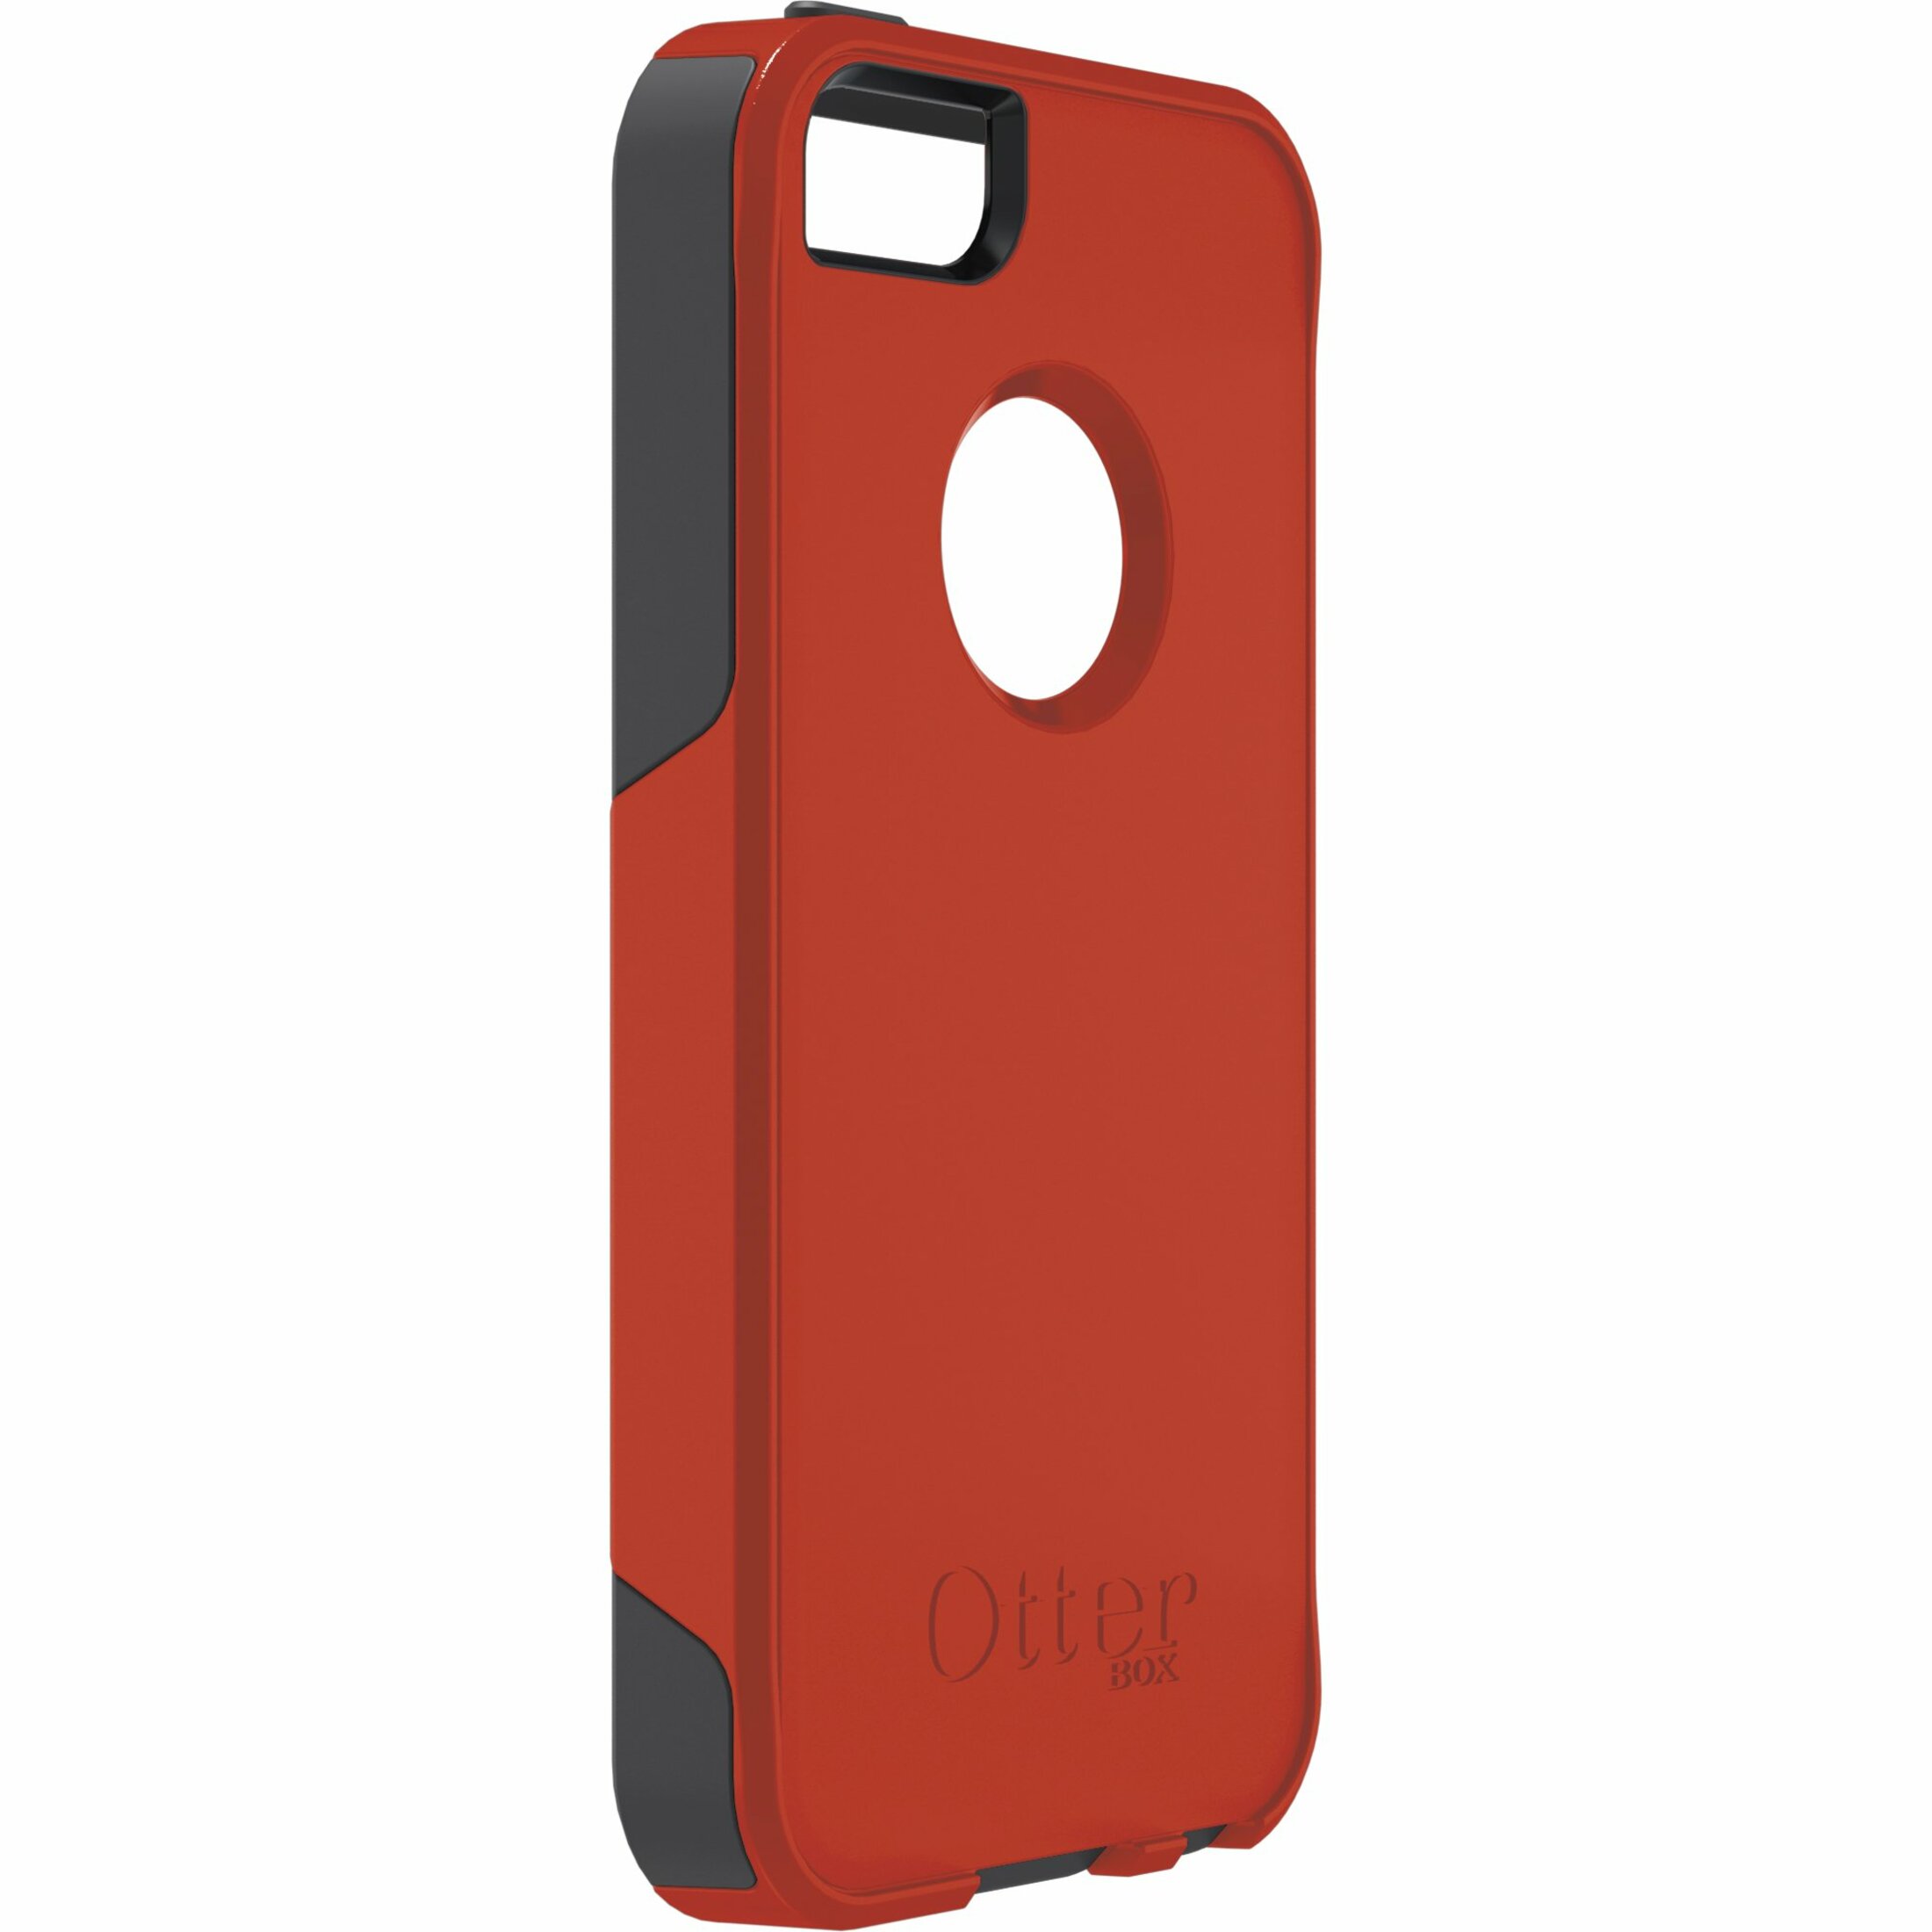 OtterBox Commuter iPhone Case - image 1 of 2